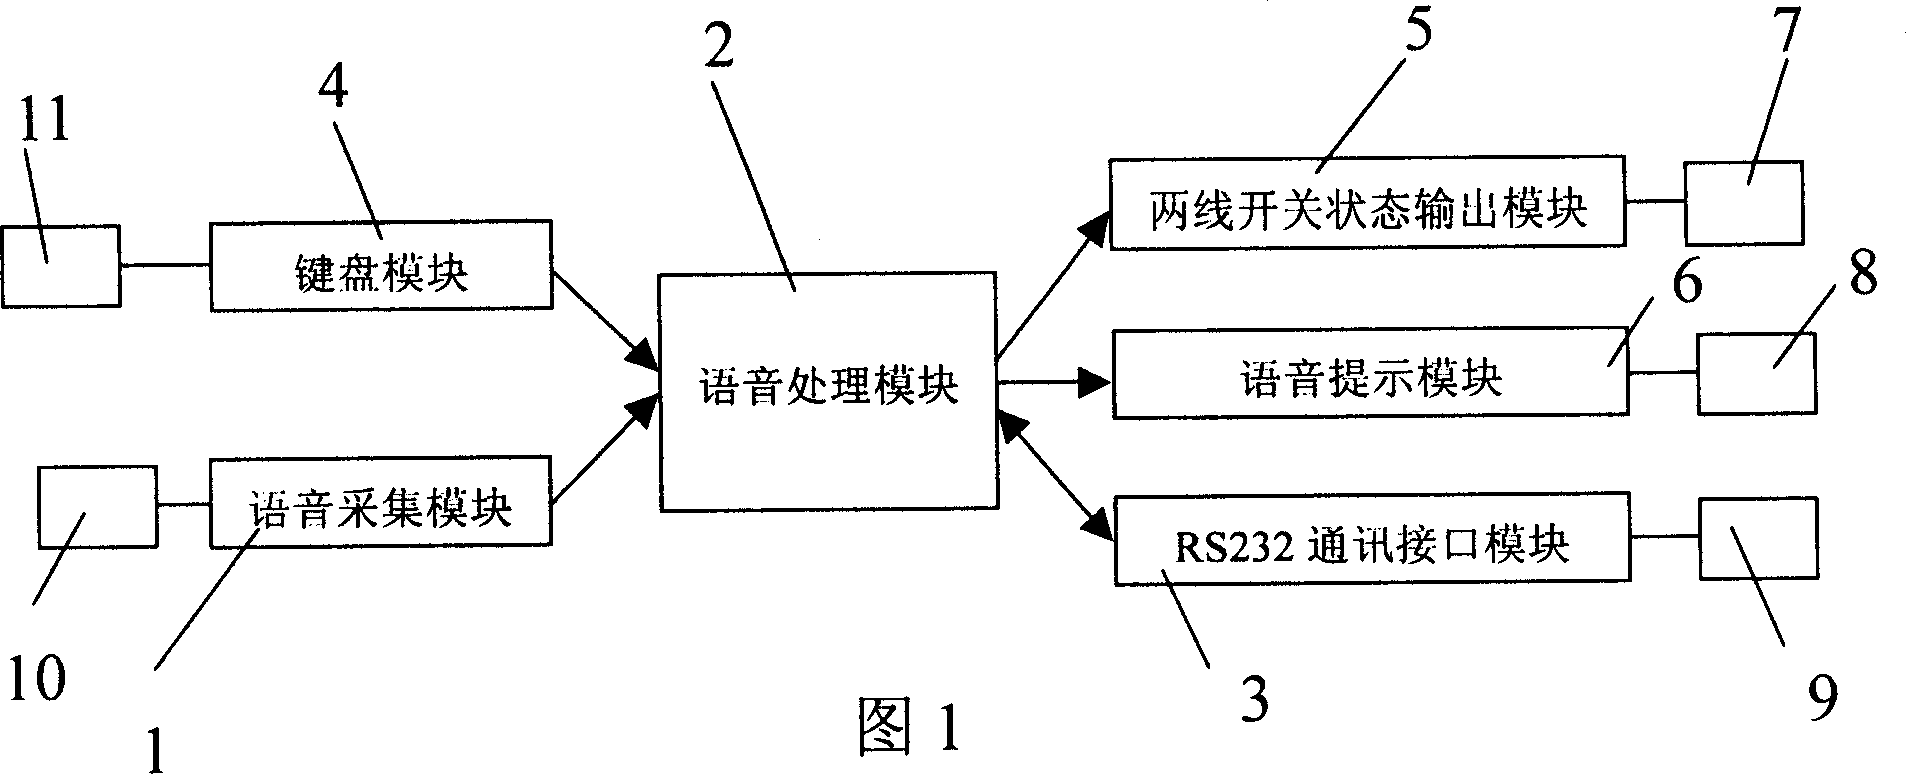 Soundwave discriminating unlocking module and unlocking method for interactive device at gate of building